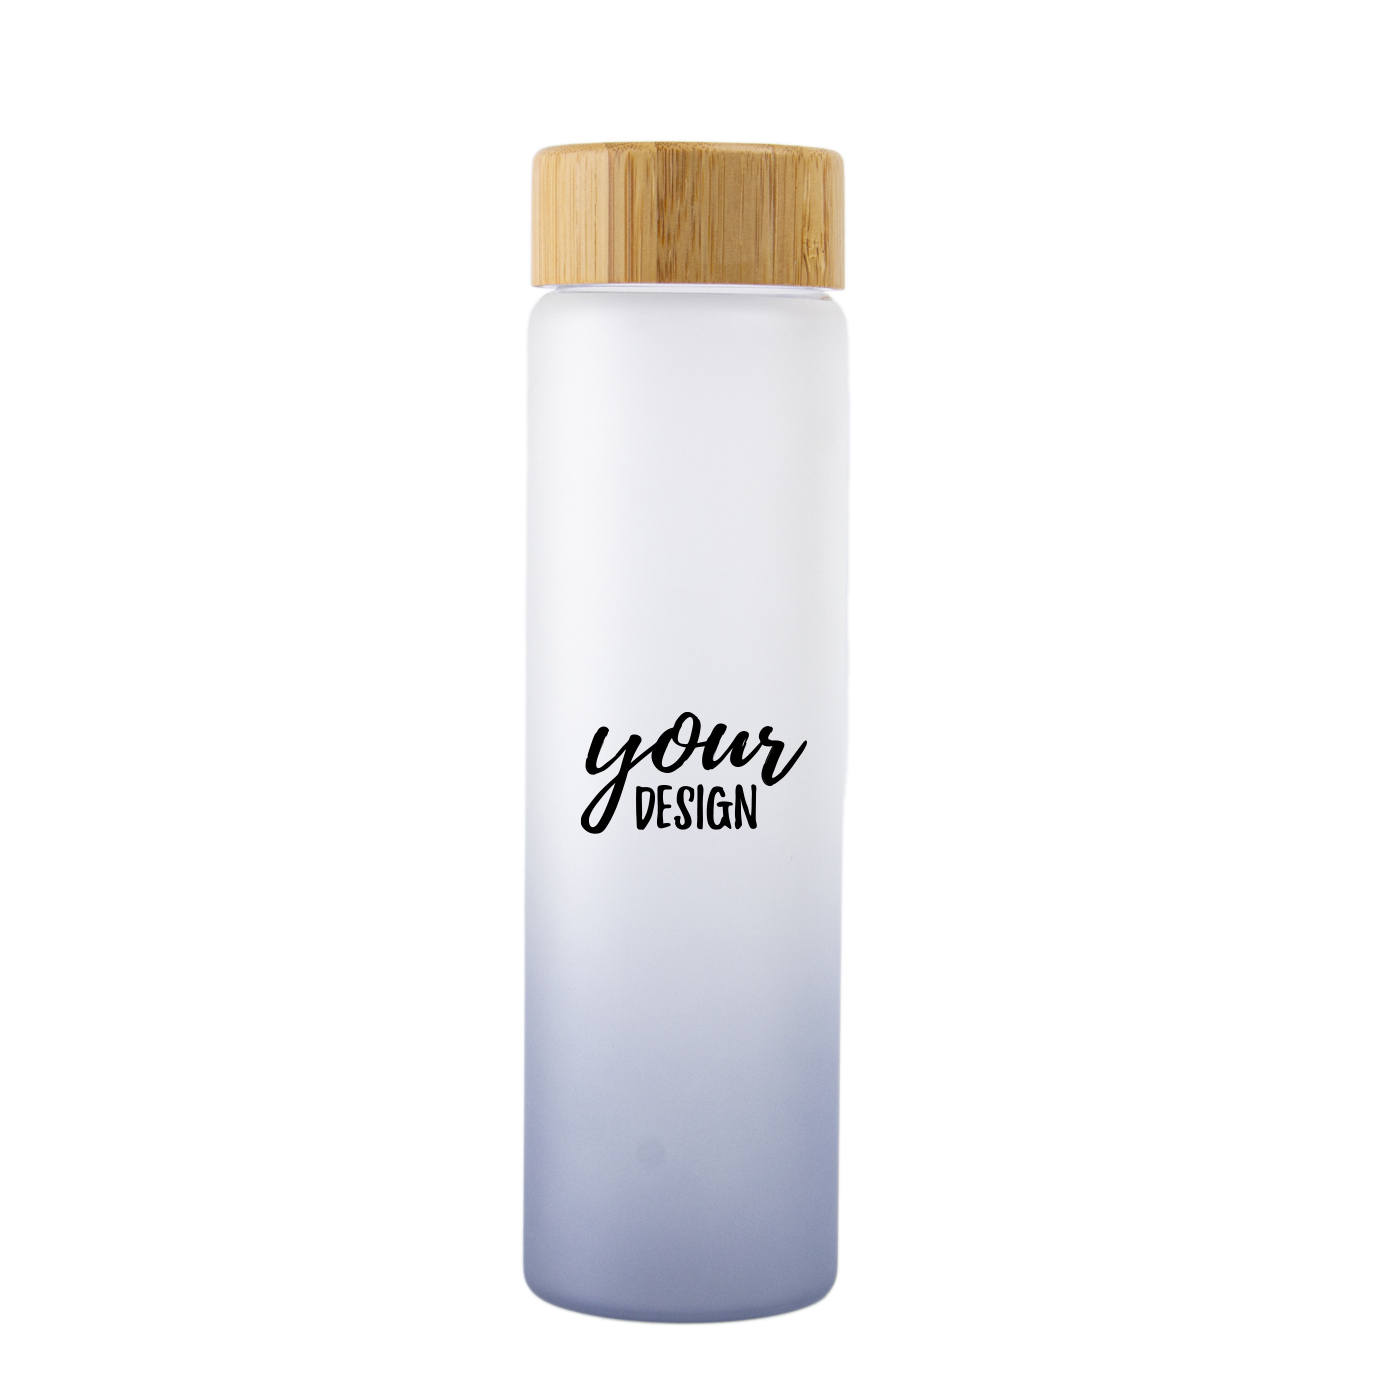 20 oz. Gradient Color Frosted Glass Water Bottle1